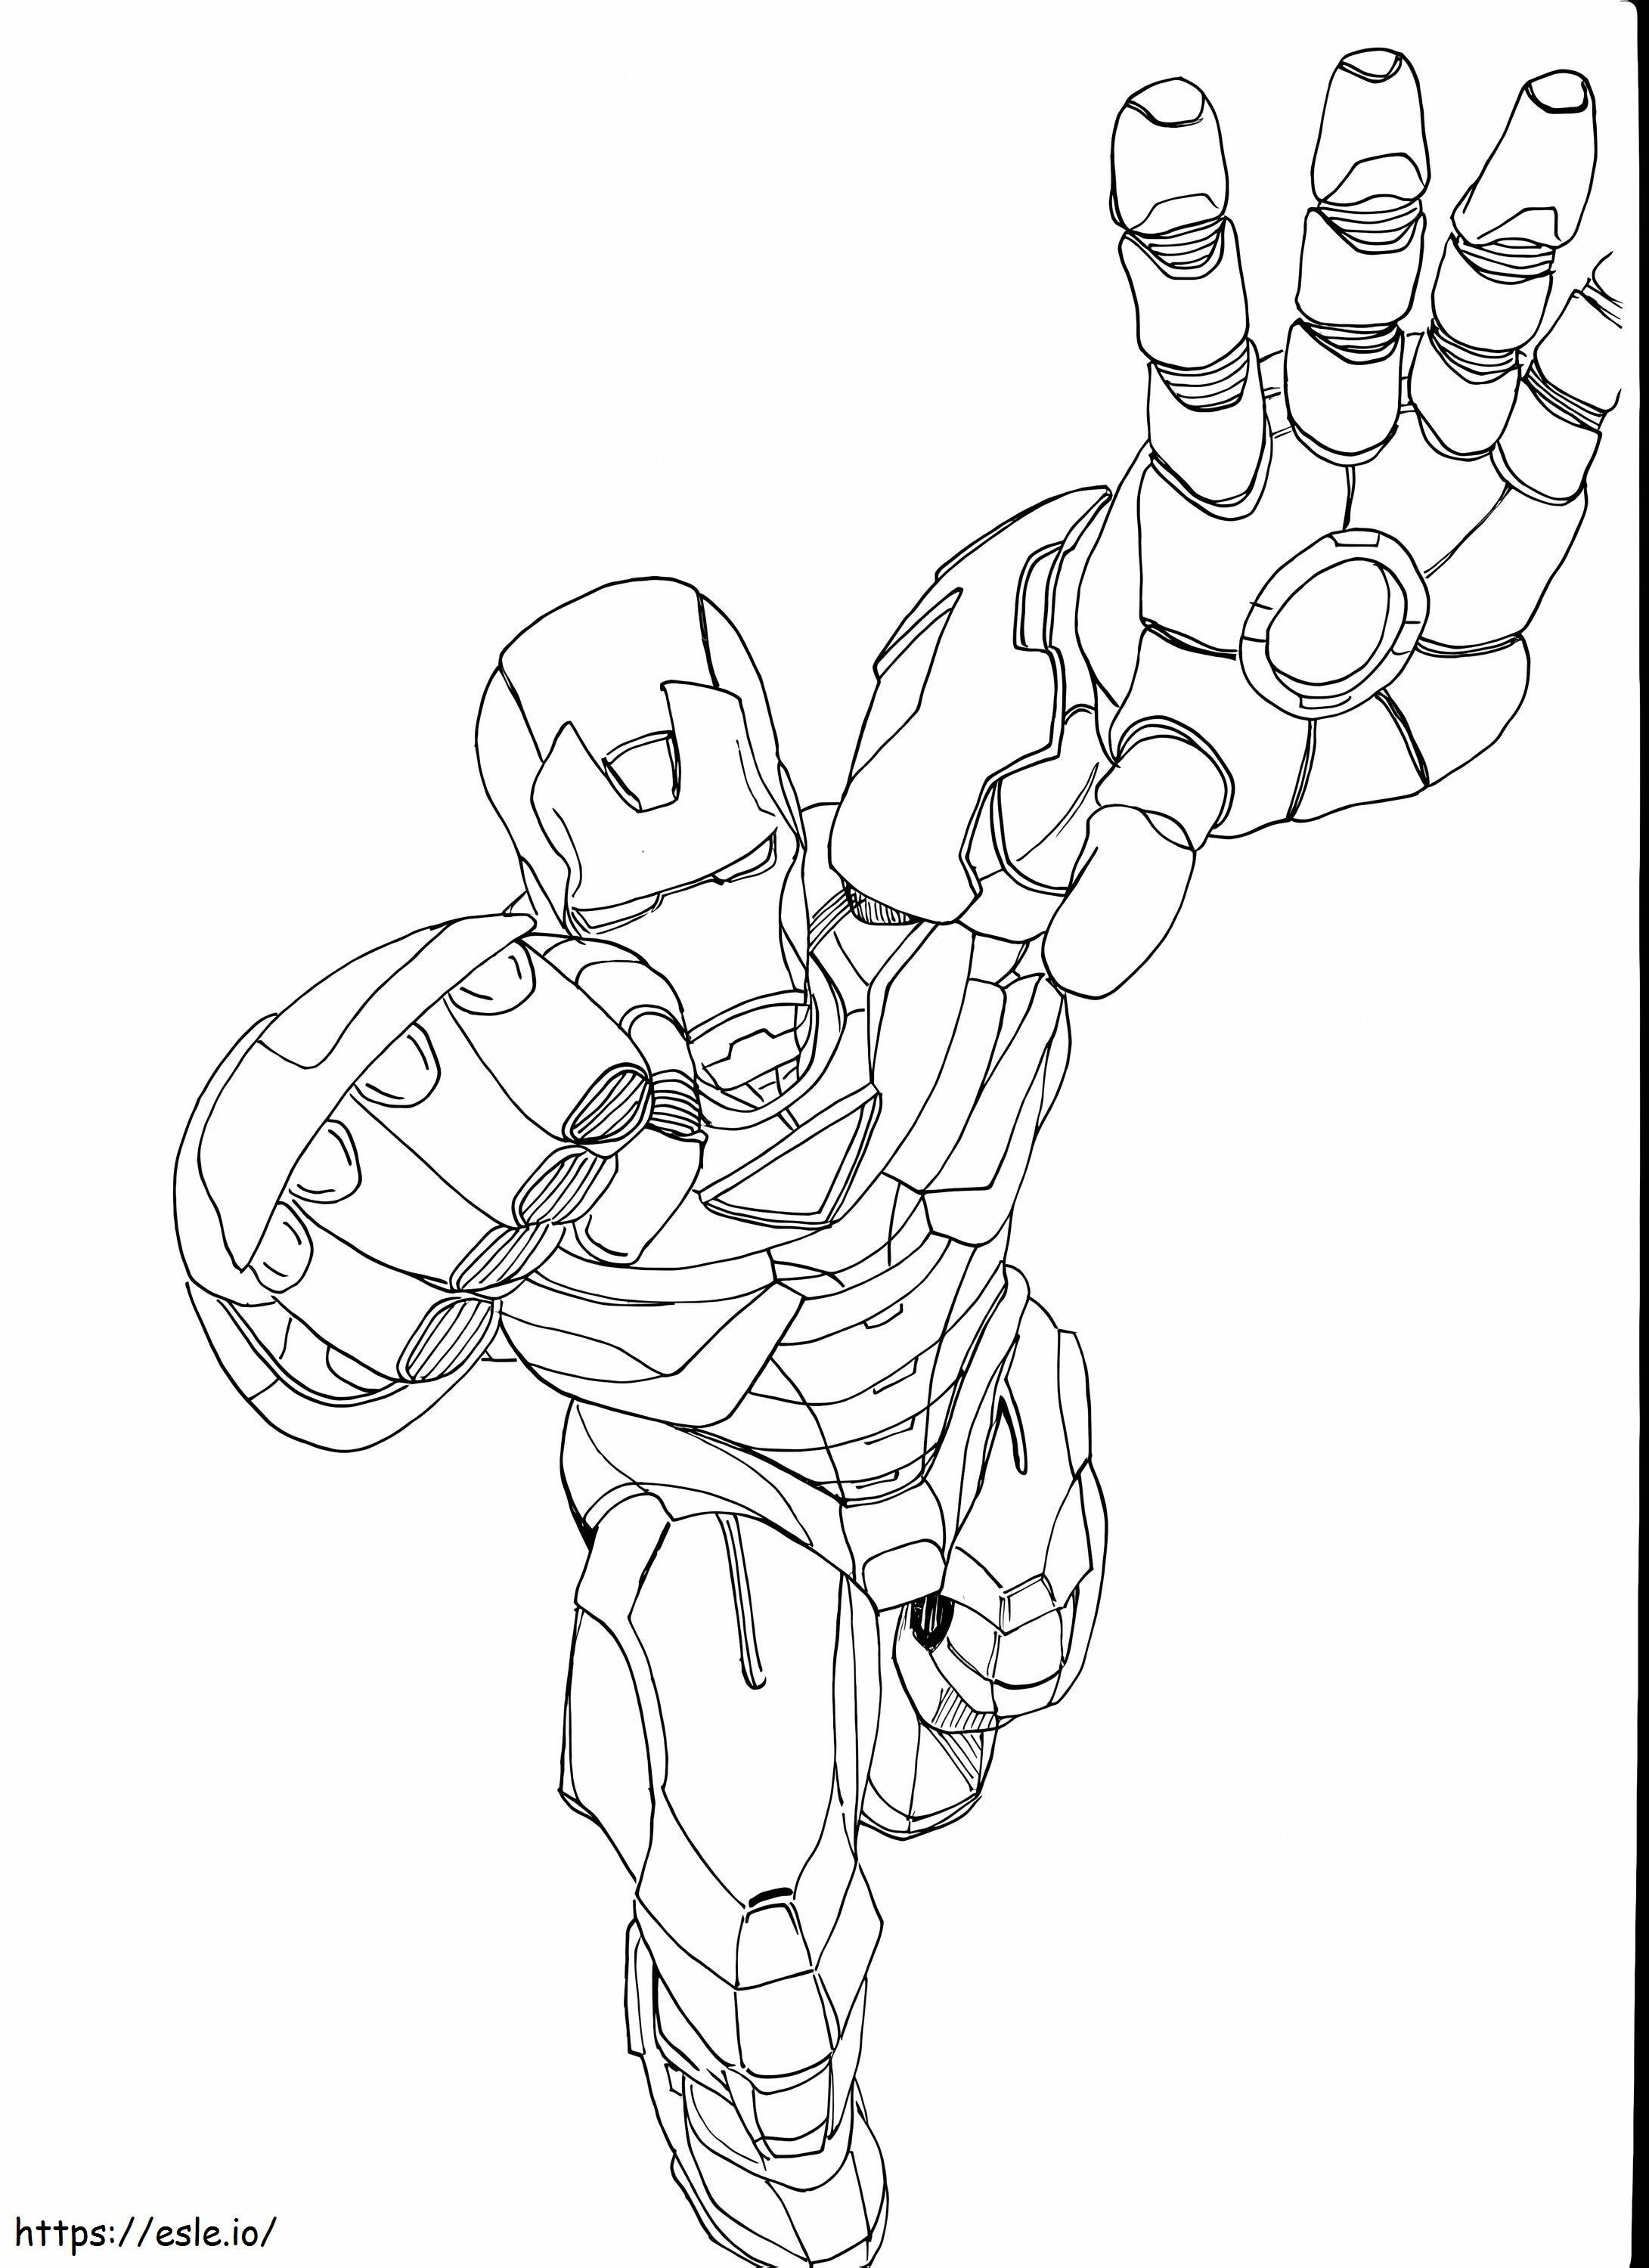 Ironman Attack coloring page